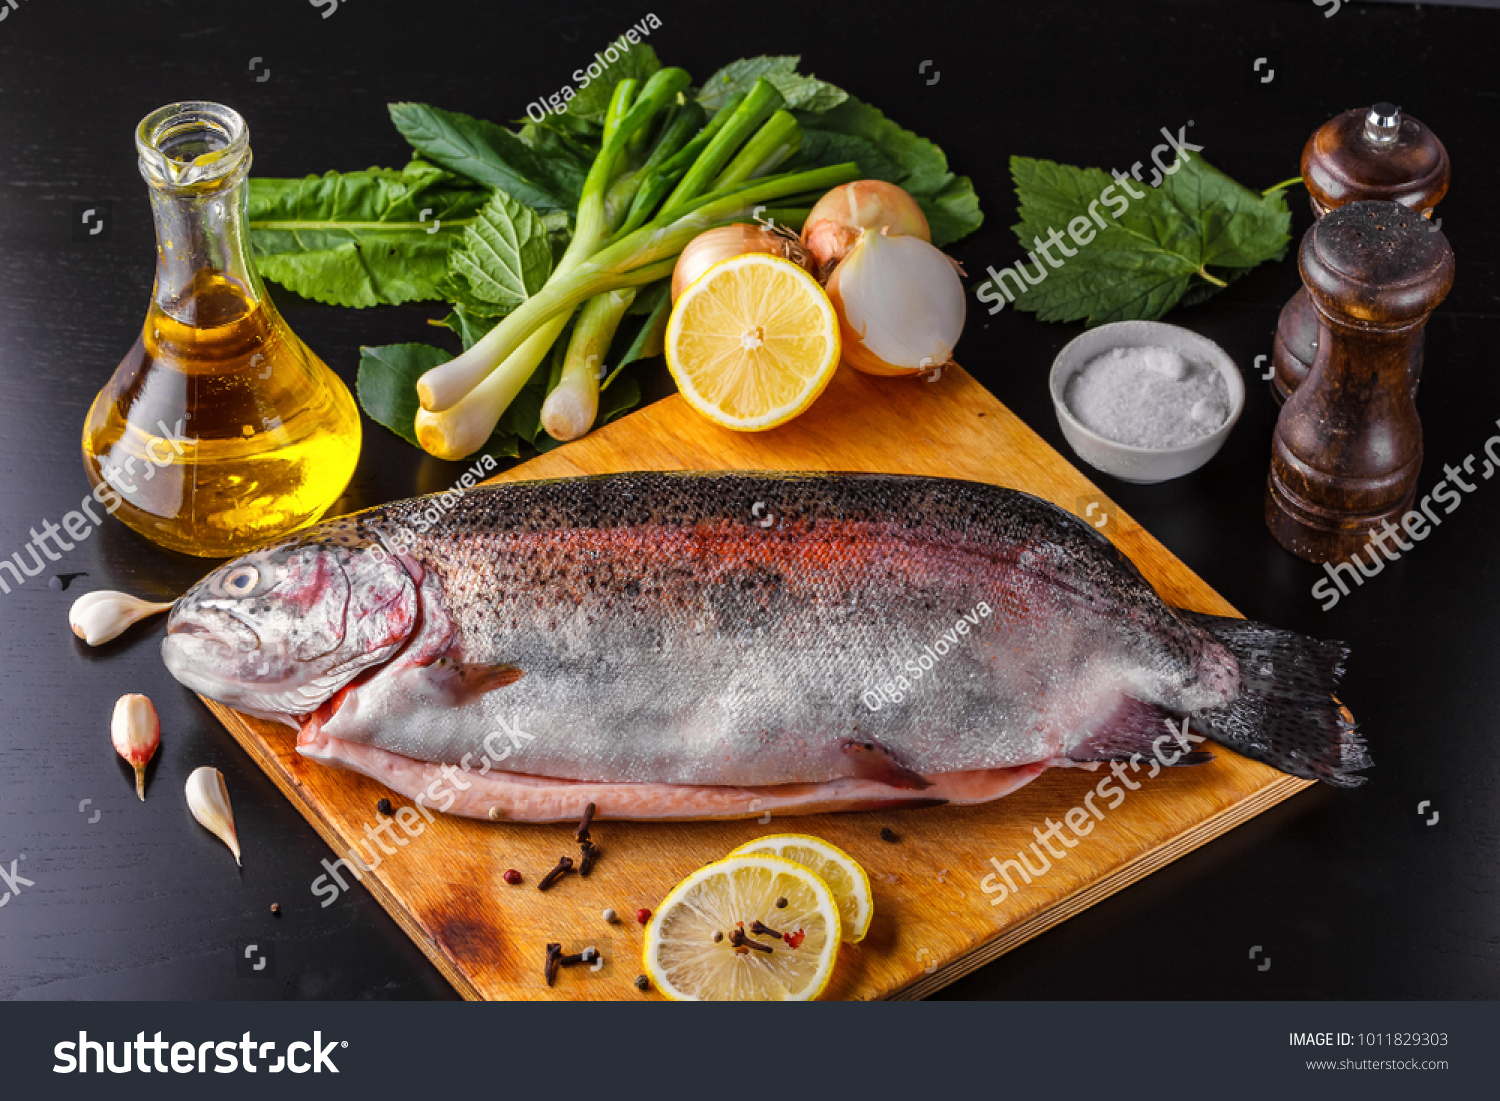 Fresh gutted trout on a wooden cutting board surrounded by ingredients for baking: olive oil, lemon, spring onions, garlic and spices. Top view #1011829303